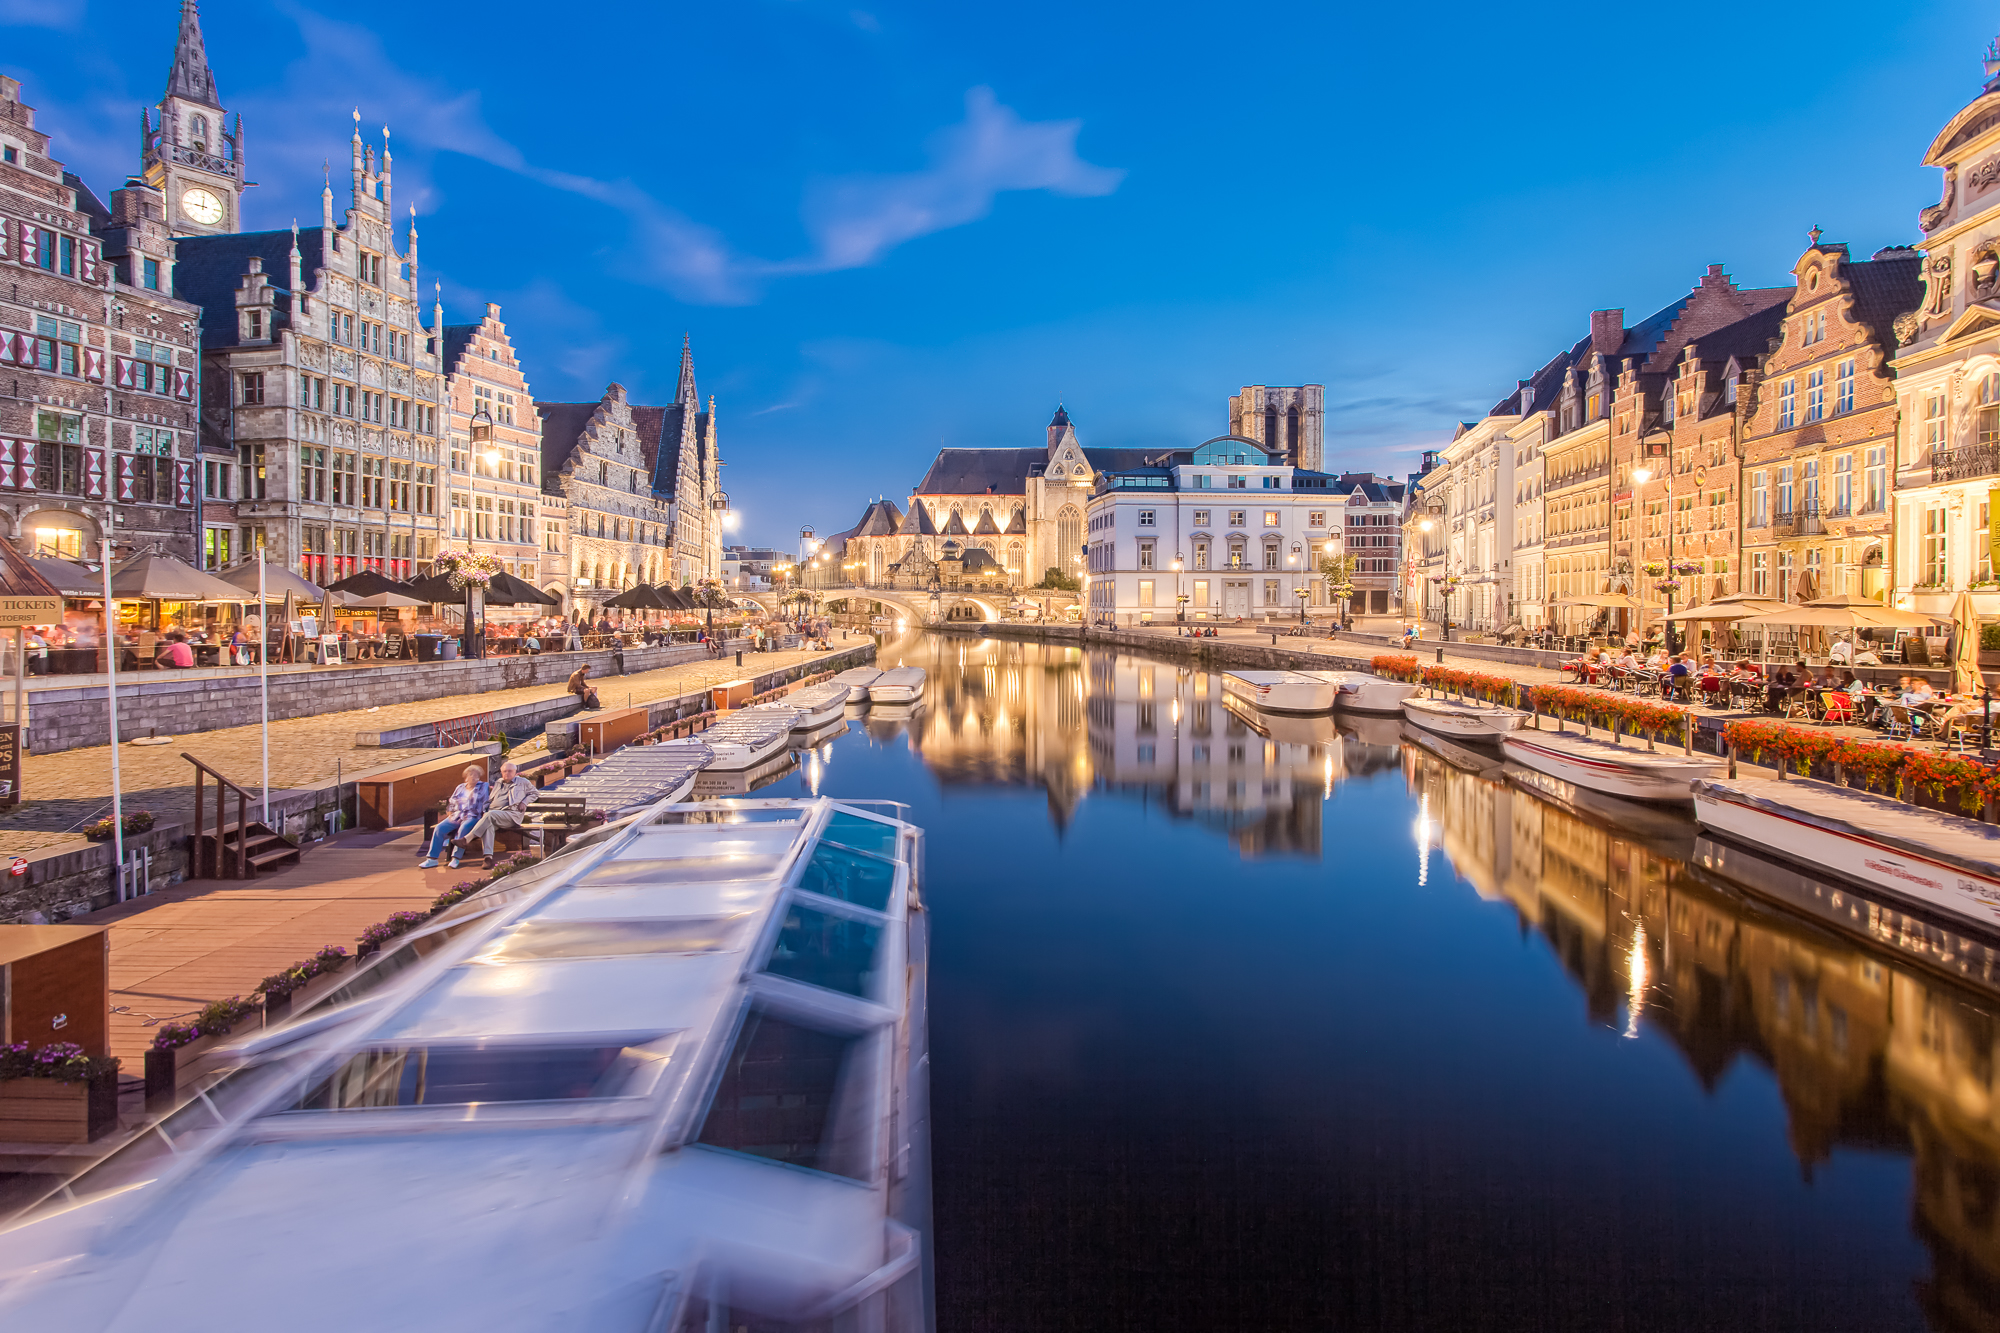 Ghent became the first city to sign up to the second Covenant of Mayors